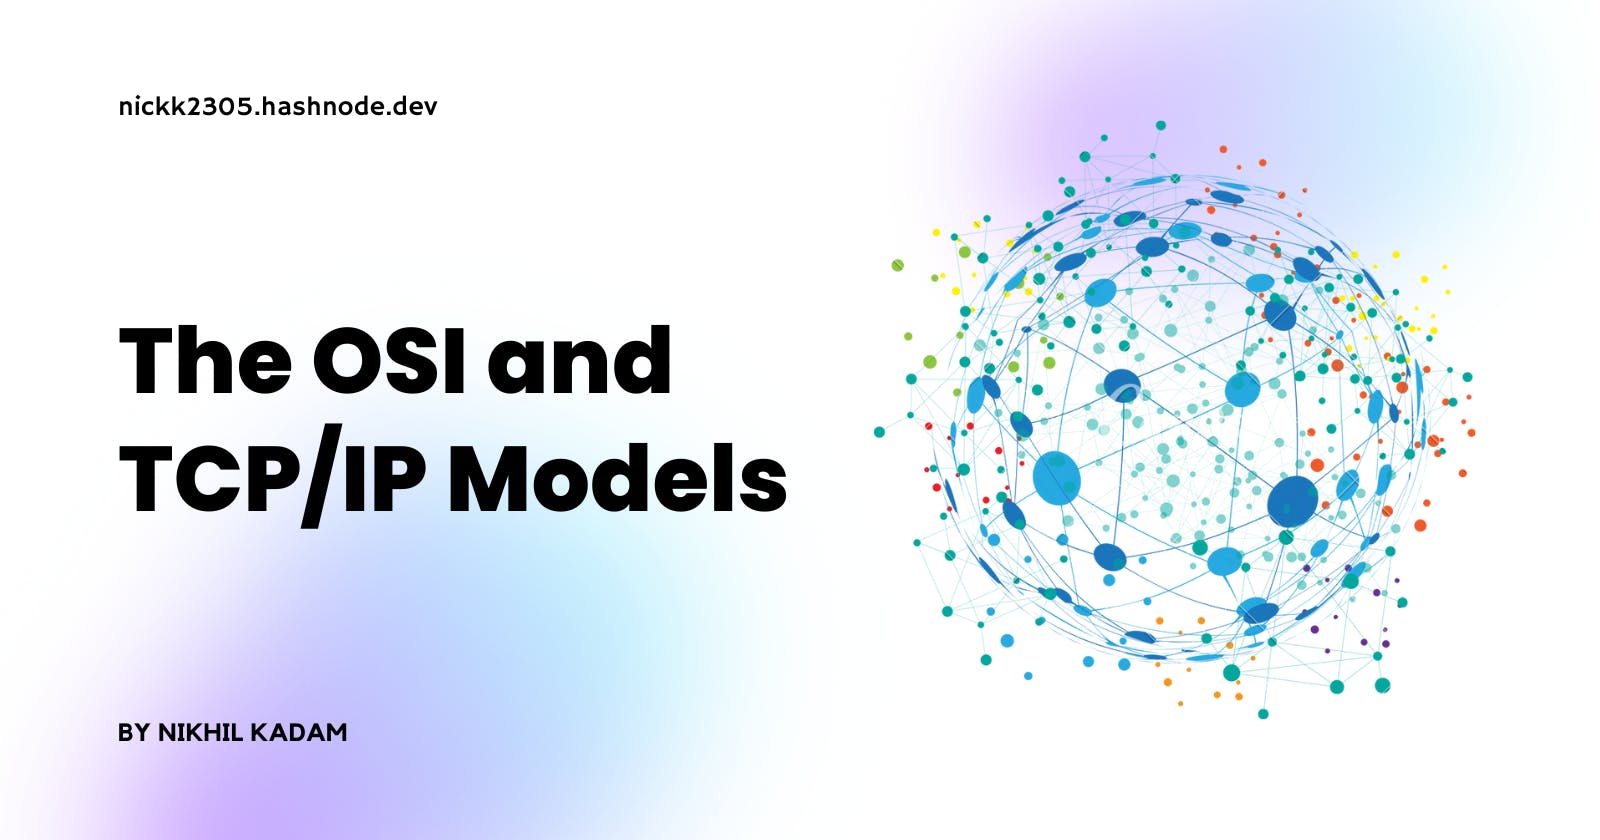 Beginner's Guide to the OSI and TCP/IP Models